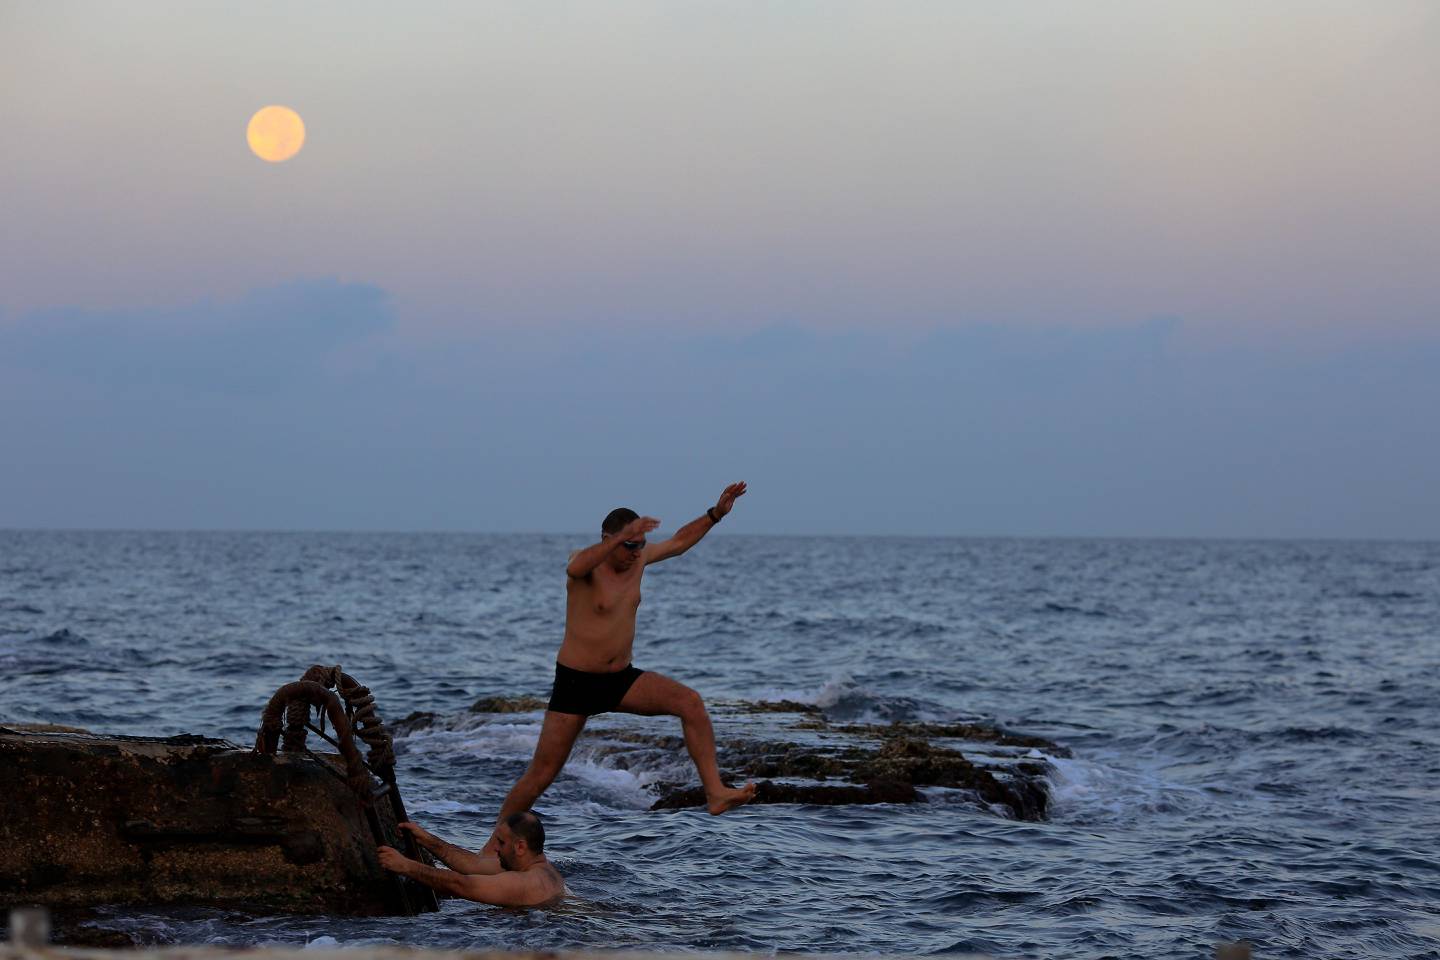 A Lebanese man jumps in the water as the moon rises over the Mediterranean Sea on the seafront promenade in Beirut, Lebanon, Tuesday, Nov. 15, 2016. The brightest moon in almost 69 years lit up the sky, during its closest approach to earth as the "Supermoon" reached its most luminescent phase. The moon won't be this close again until Nov. 25, 2035. (AP Photo/Hassan Ammar)